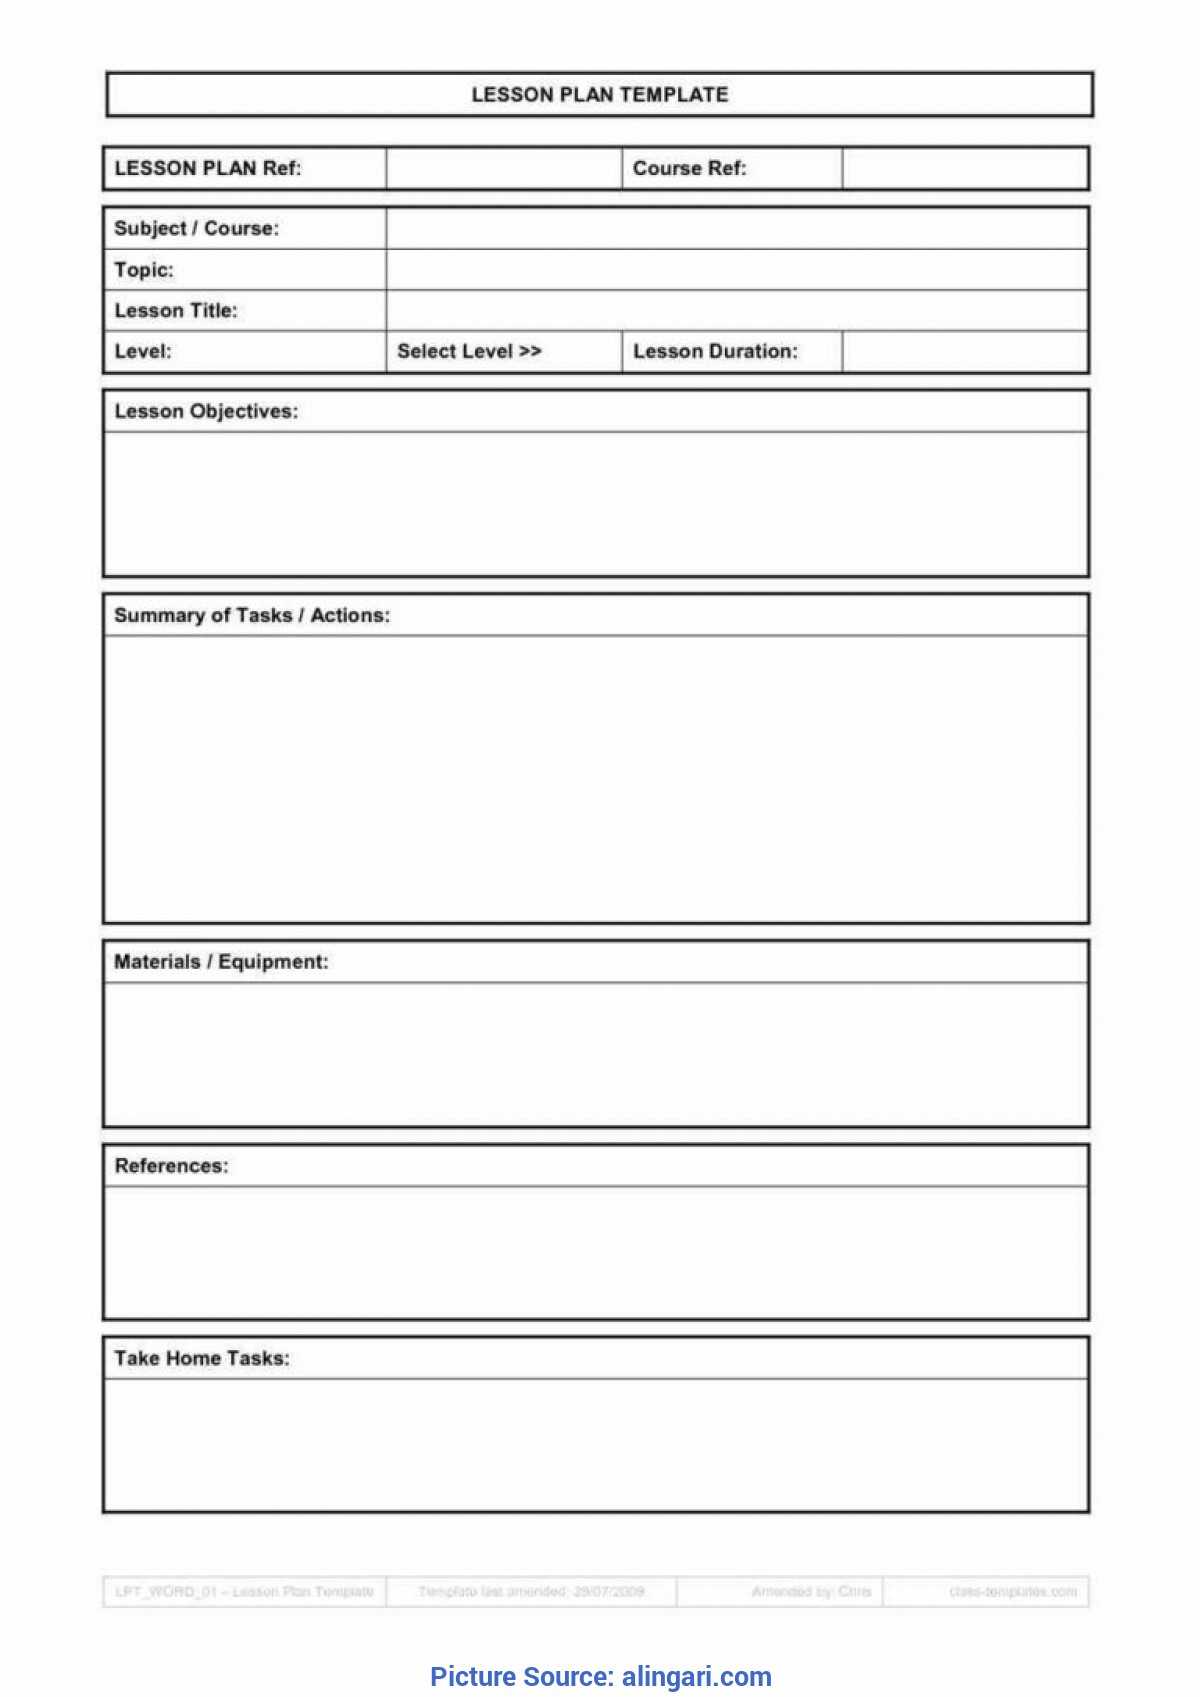 Prince2 Lessons Learned Report Template New 5 Lessons Le Throughout Prince2 Lessons Learned Report Template